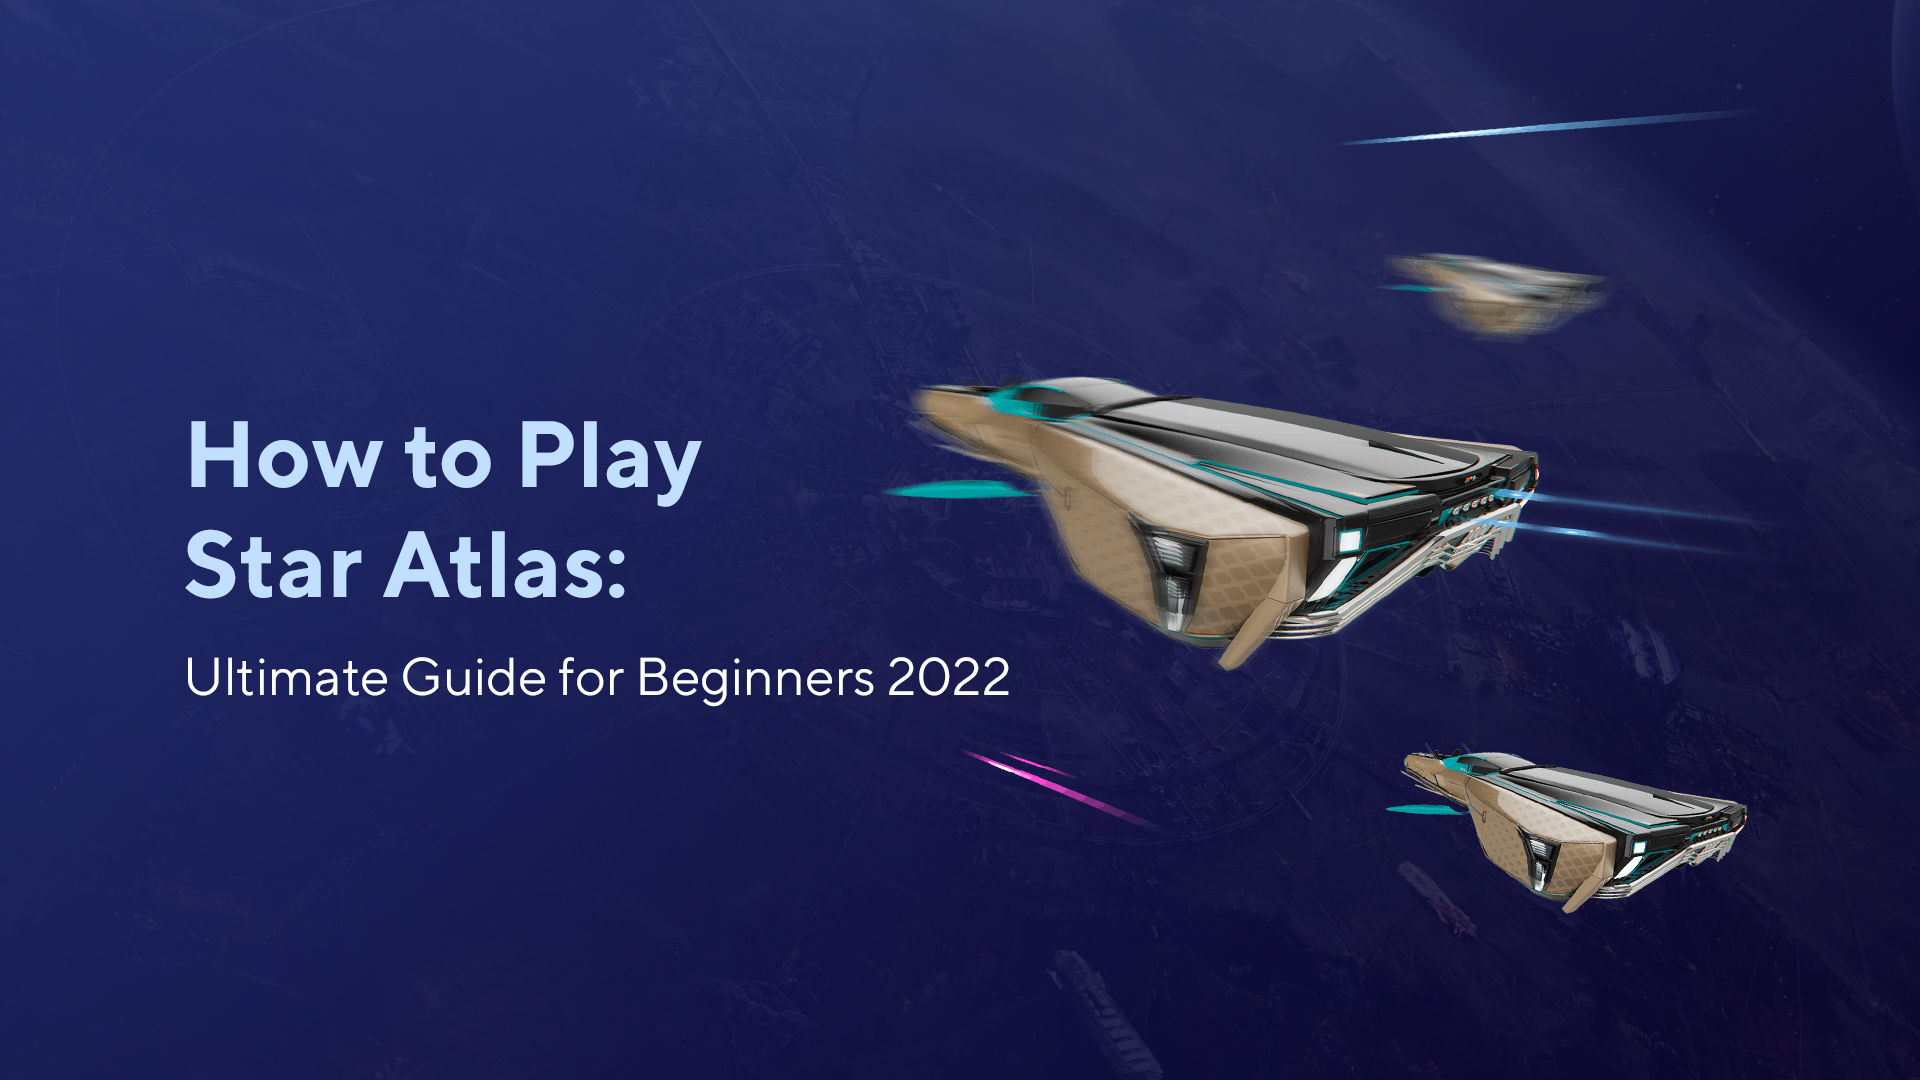 How to Play Star Atlas: Ultimate Guide for Beginners 2022